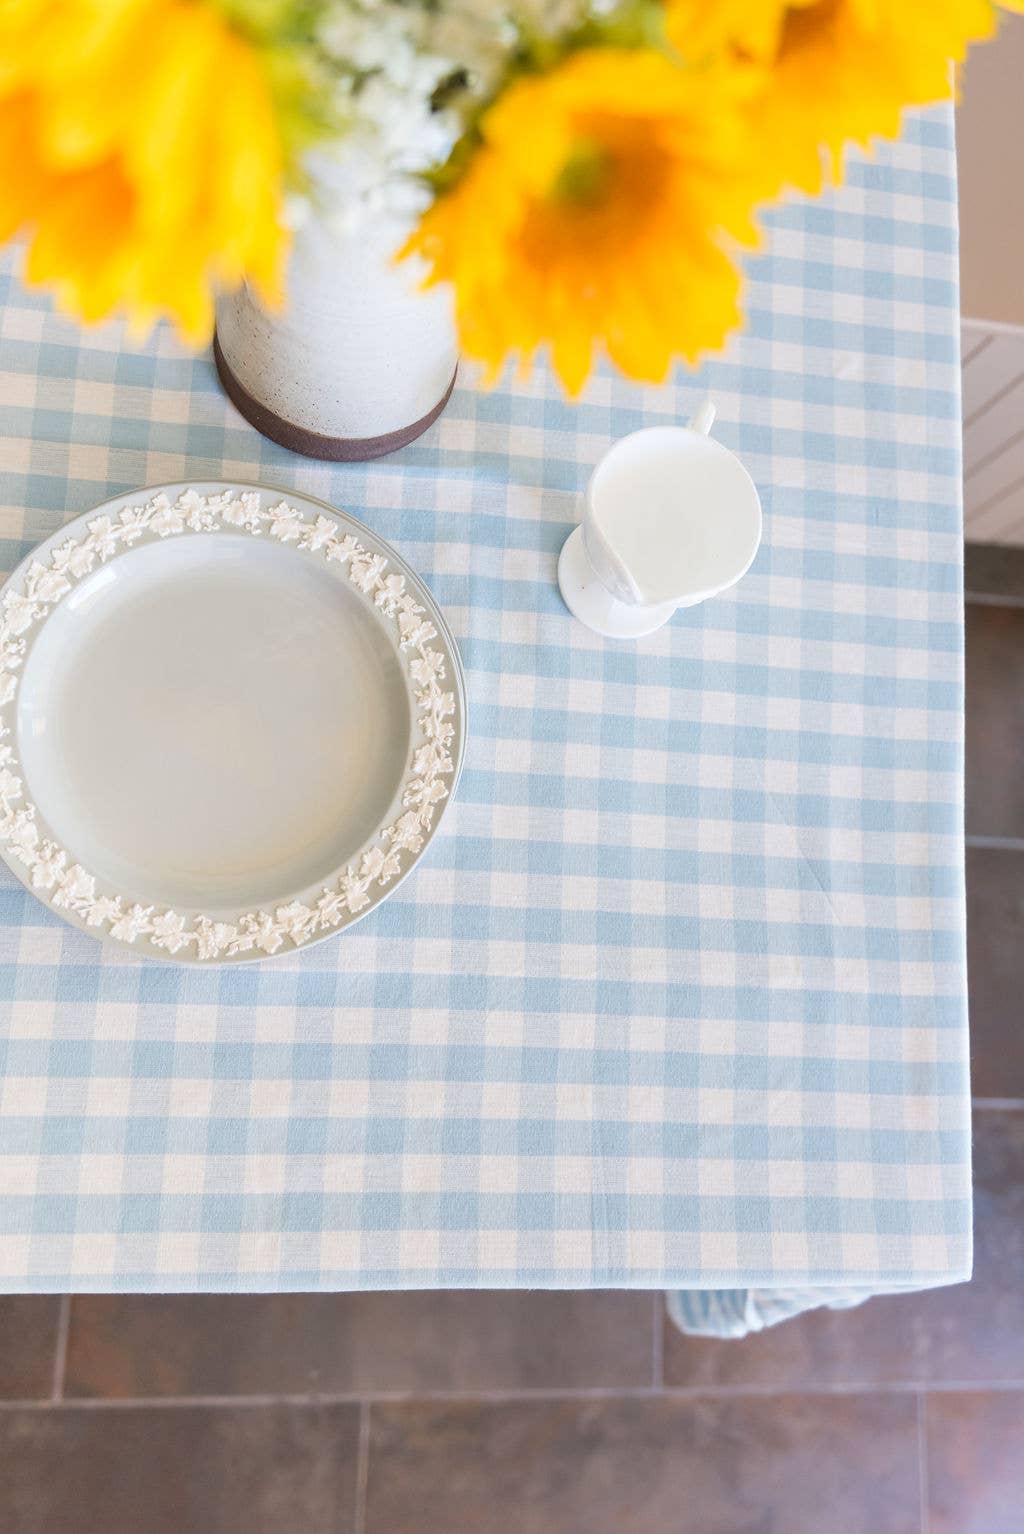 Galley and Fen - Blue Ruffled Gingham Tablecloth: 60" x 120"